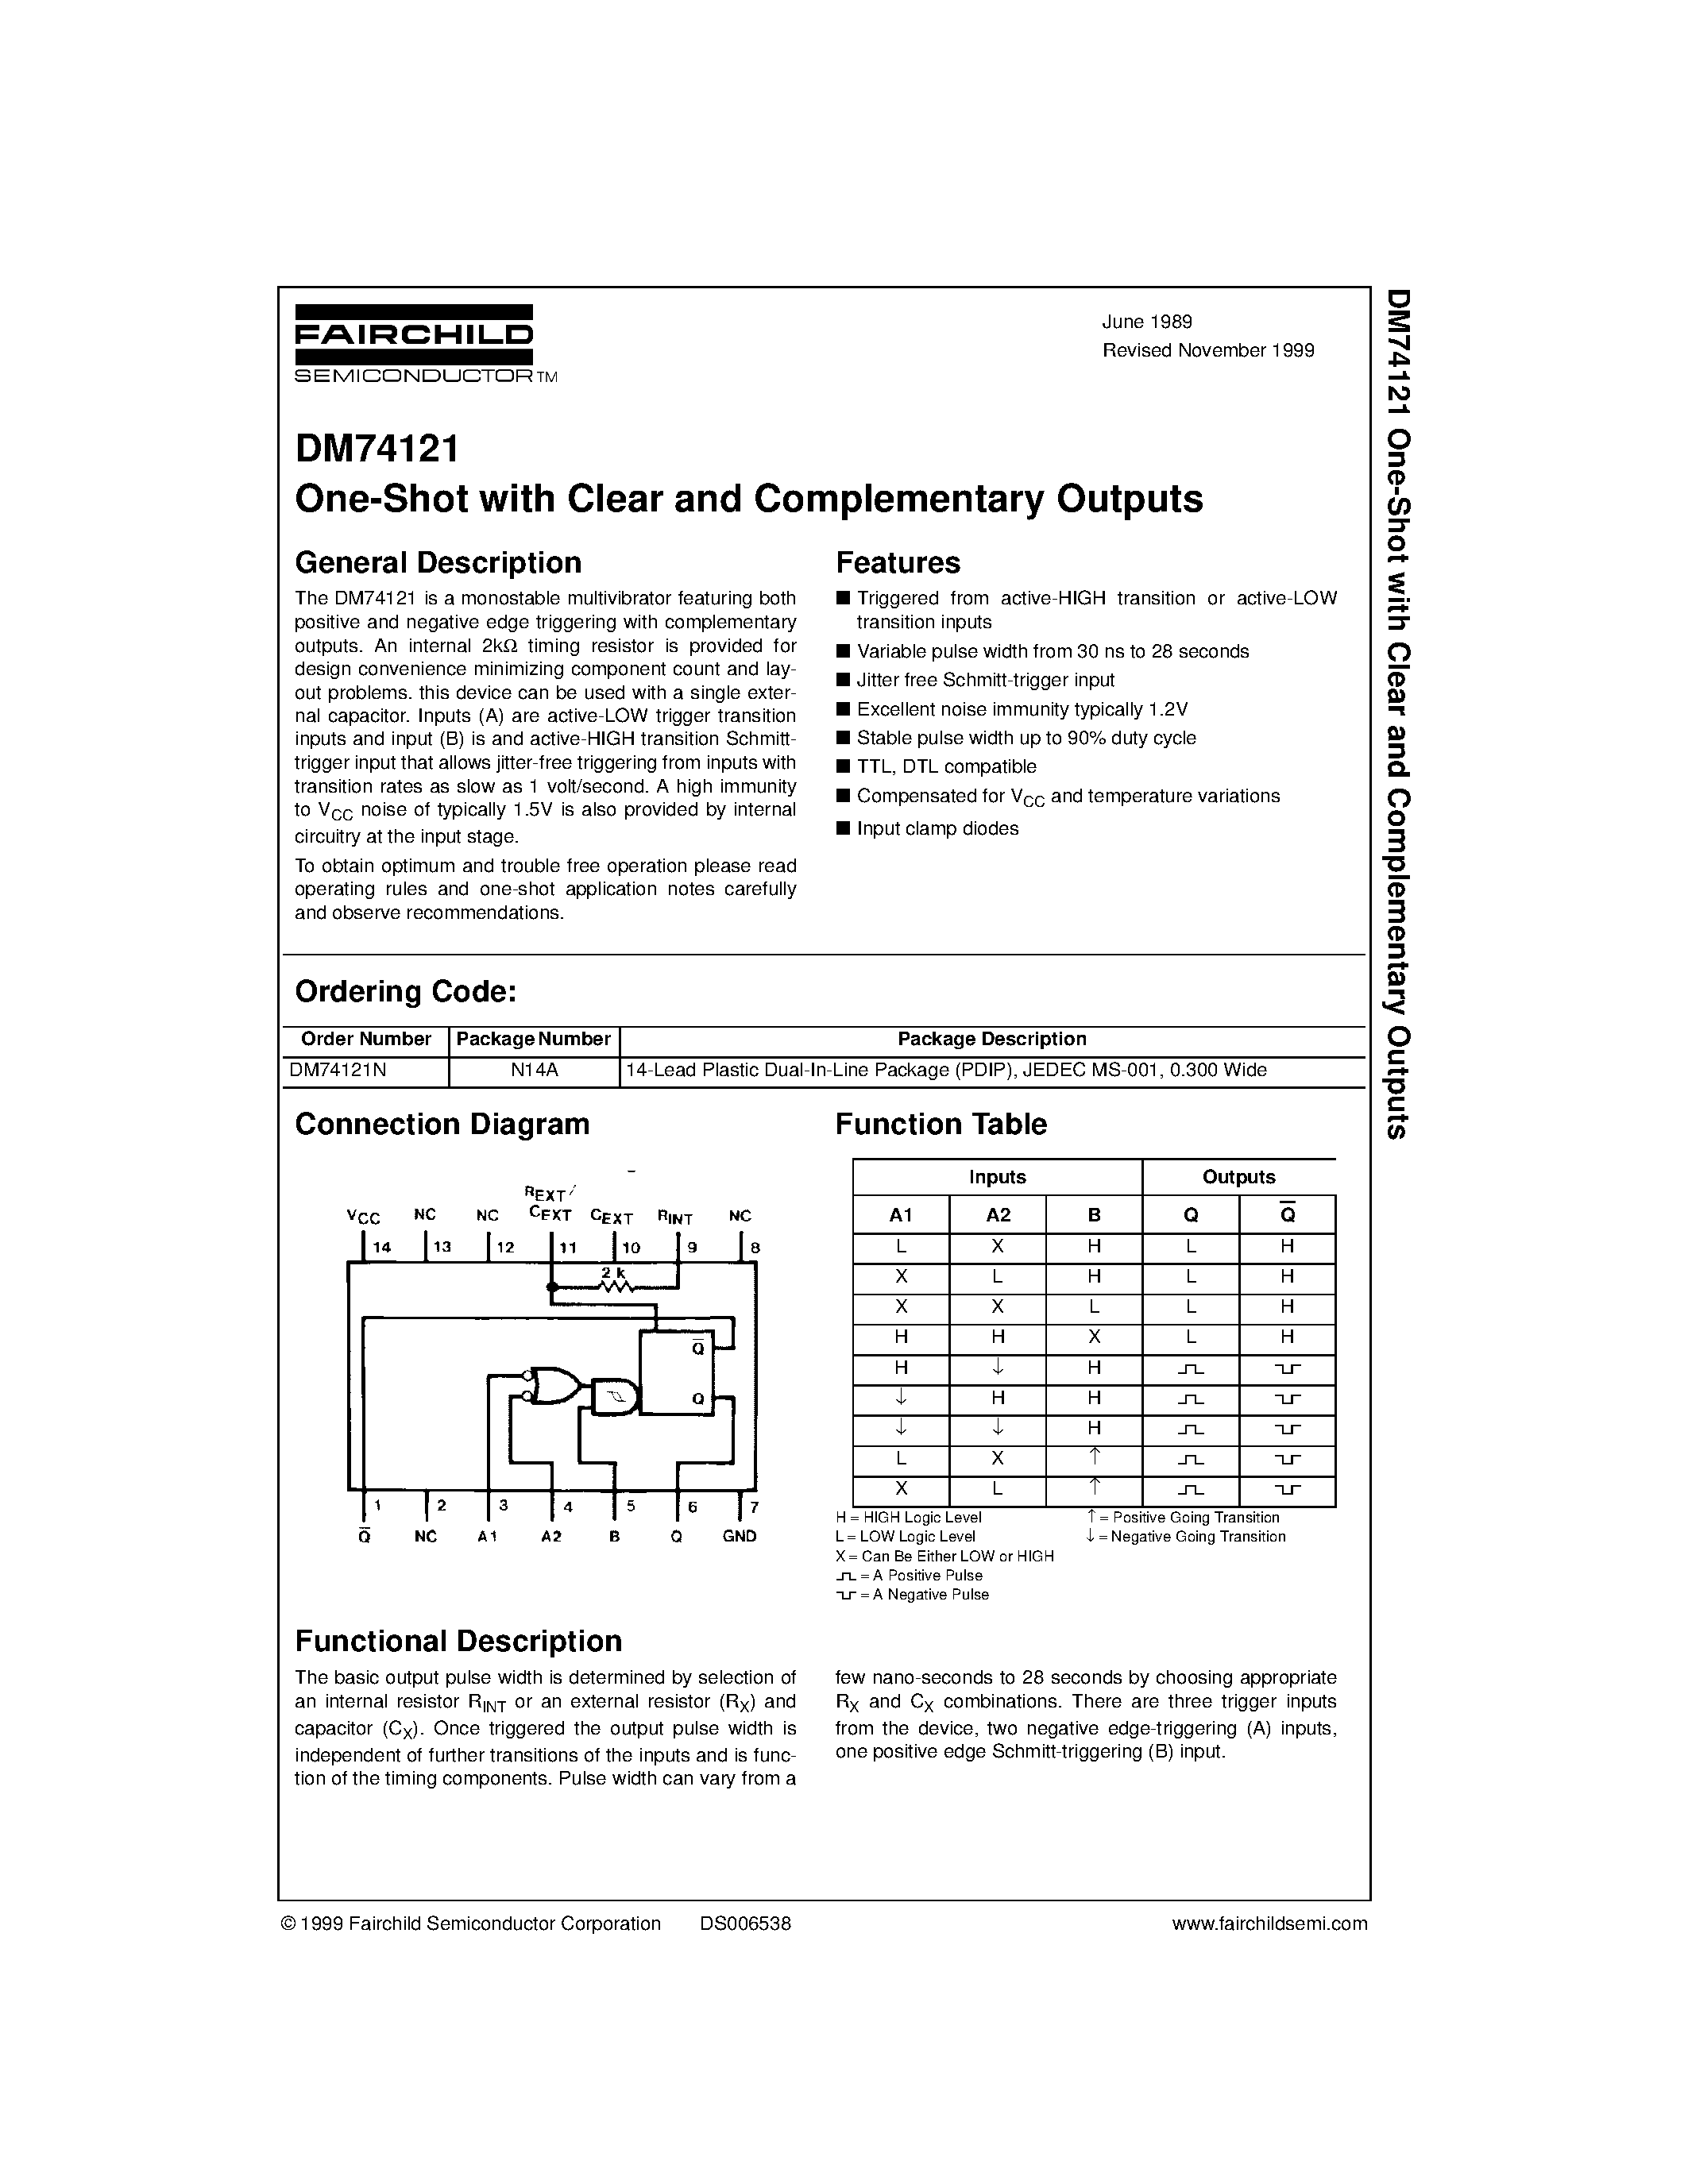 Datasheet 74121 - One-Shot with Clear and Complementary Outputs page 1